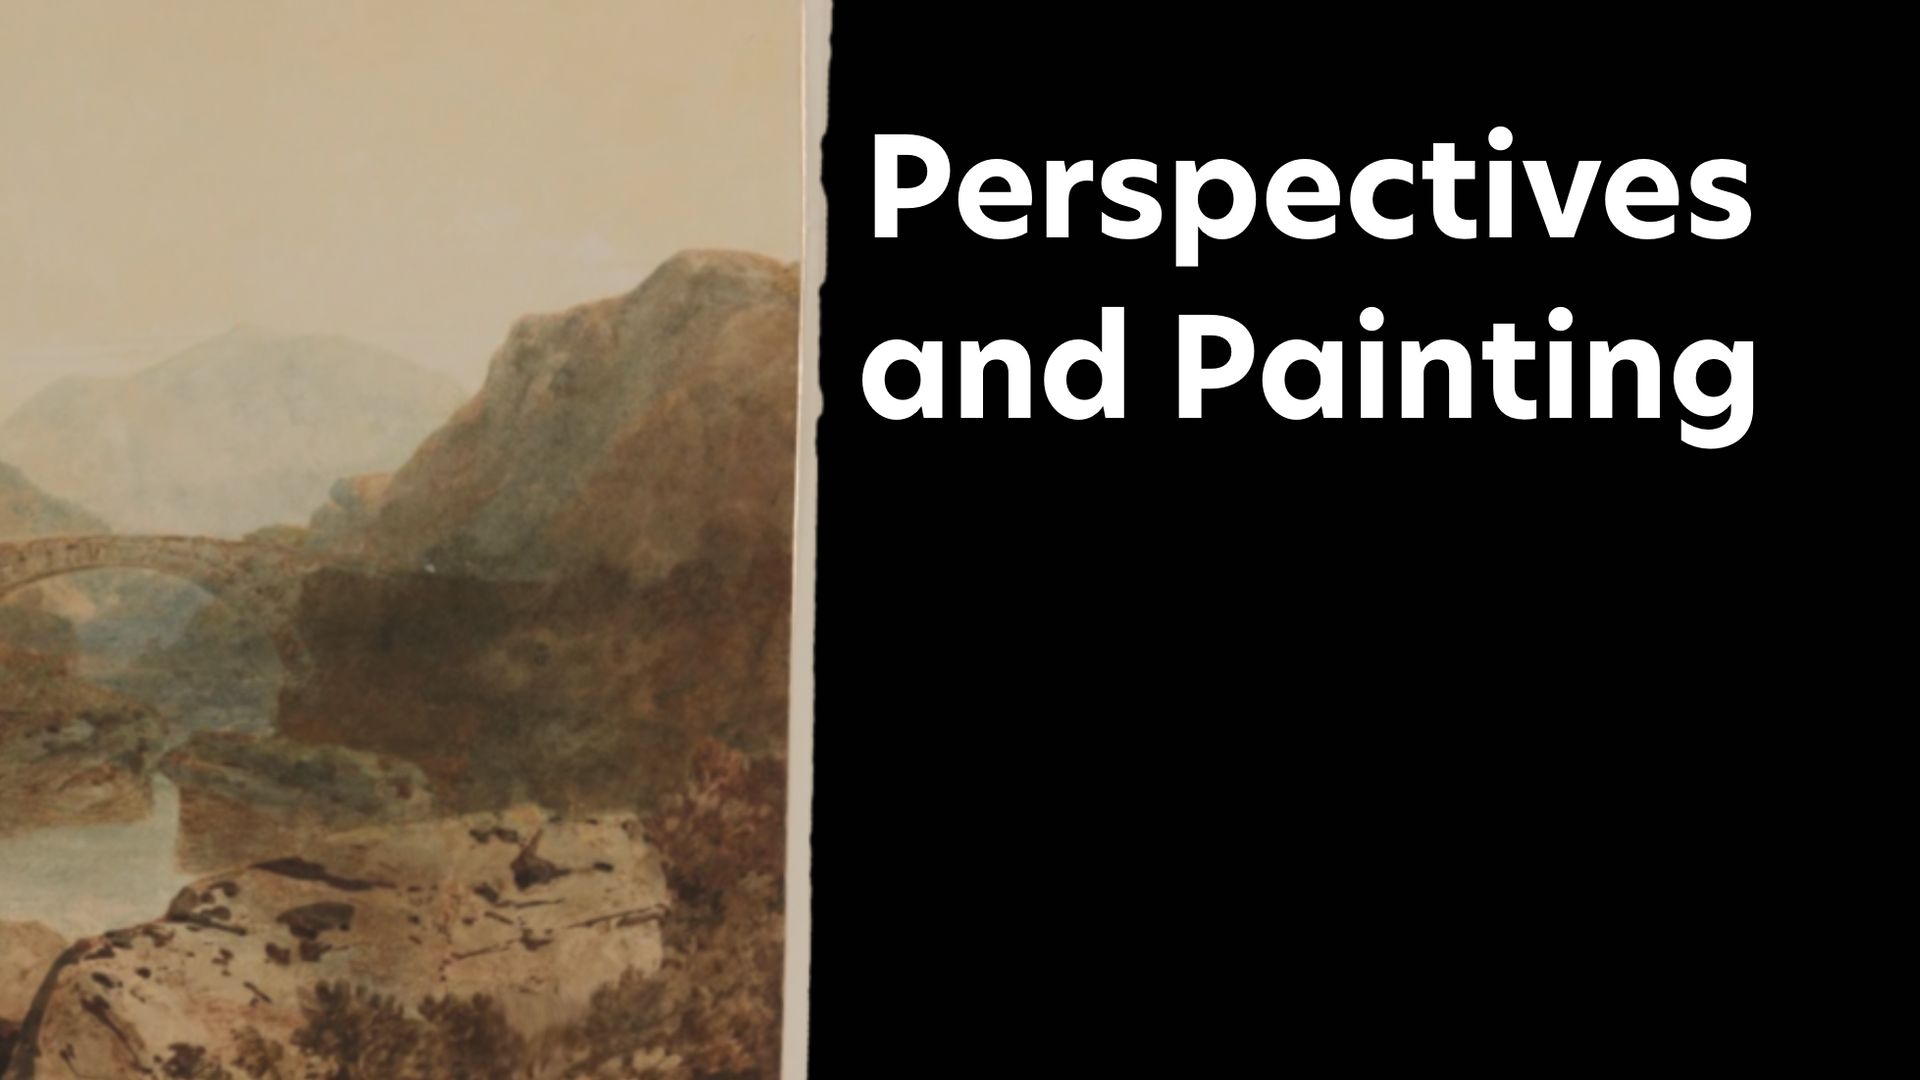 Perspectives and Painting